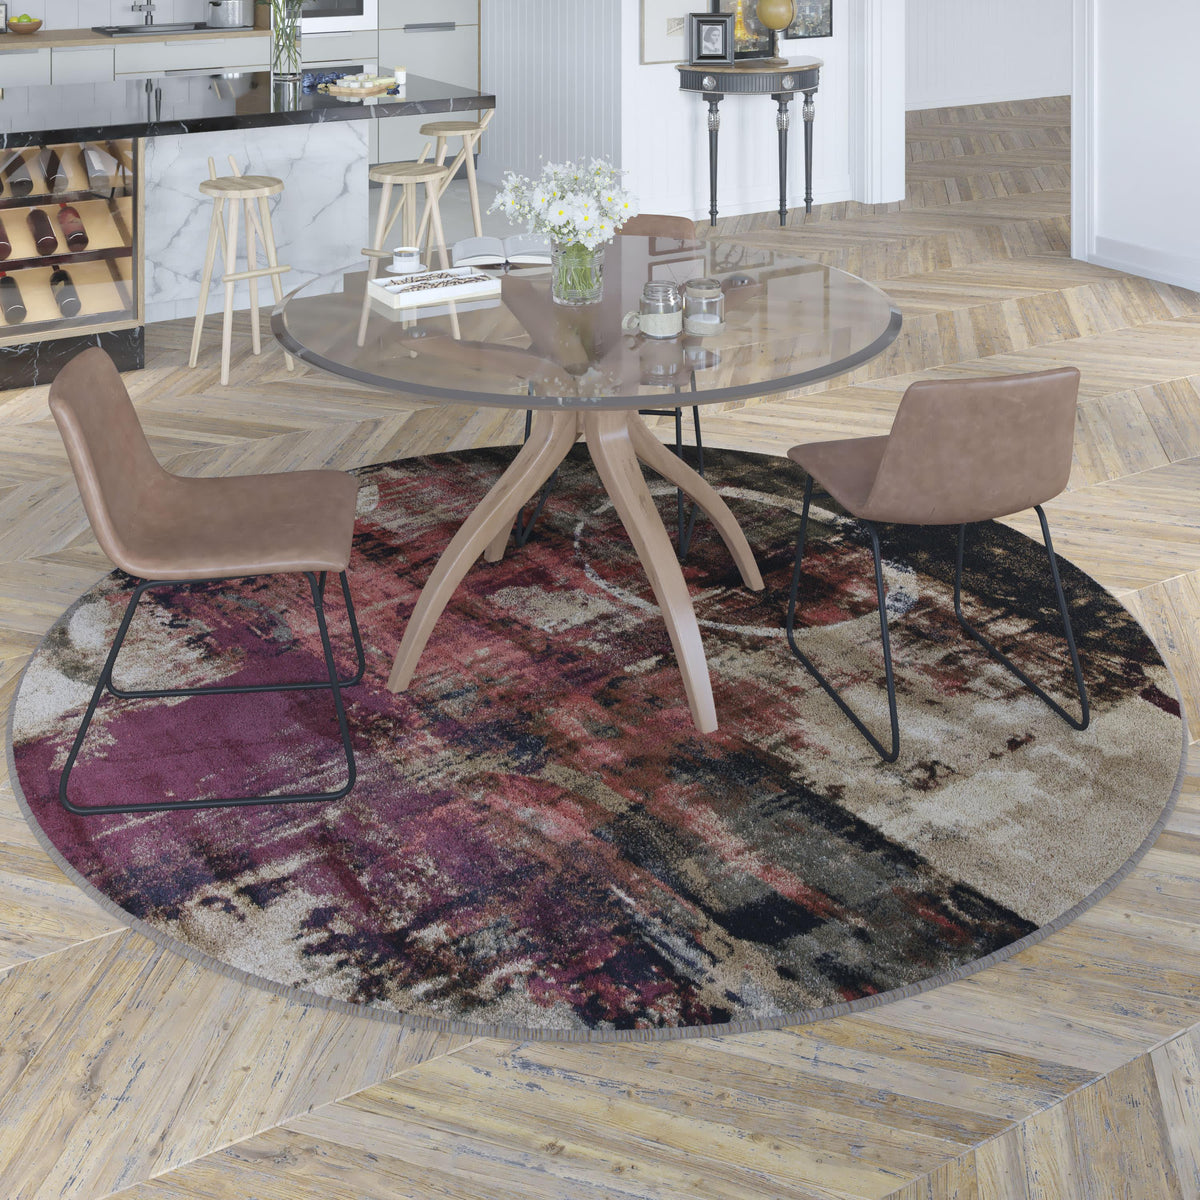 8' Round |#| Modern Round Abstract Design Area Rug in Warm Beige, Green, and Red - 8' x 8'